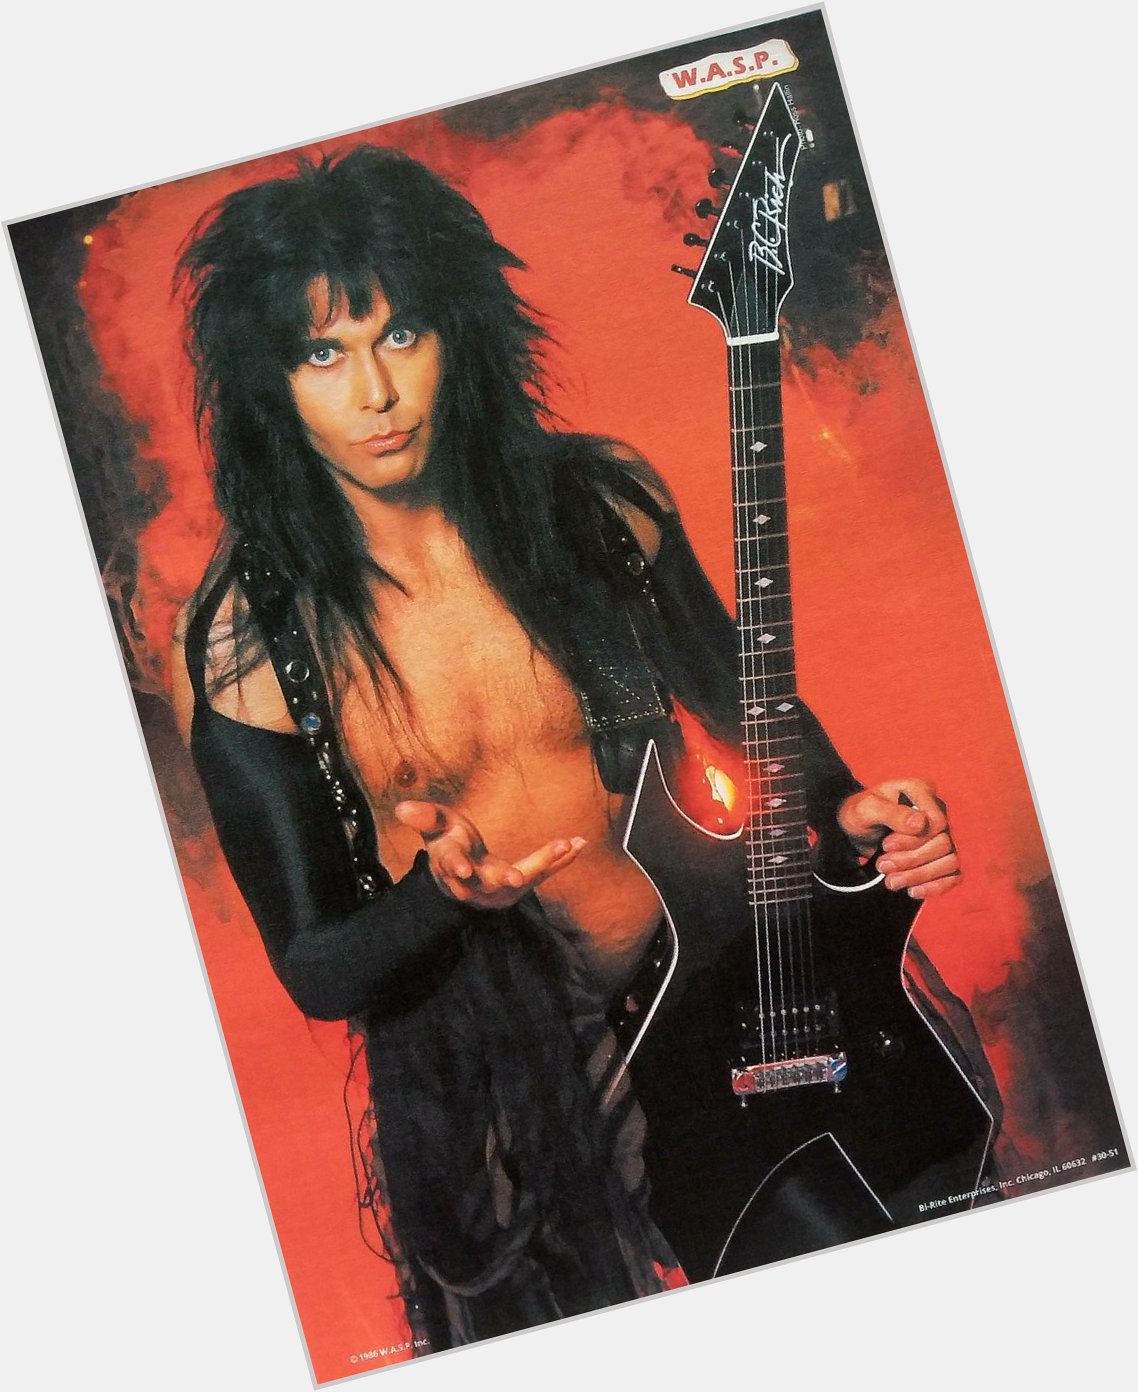 Happy Birthday to W.A.S.P. lead singer and rhythm guitarist (formerly bassist) Blackie Lawless (September 4, 1956) 